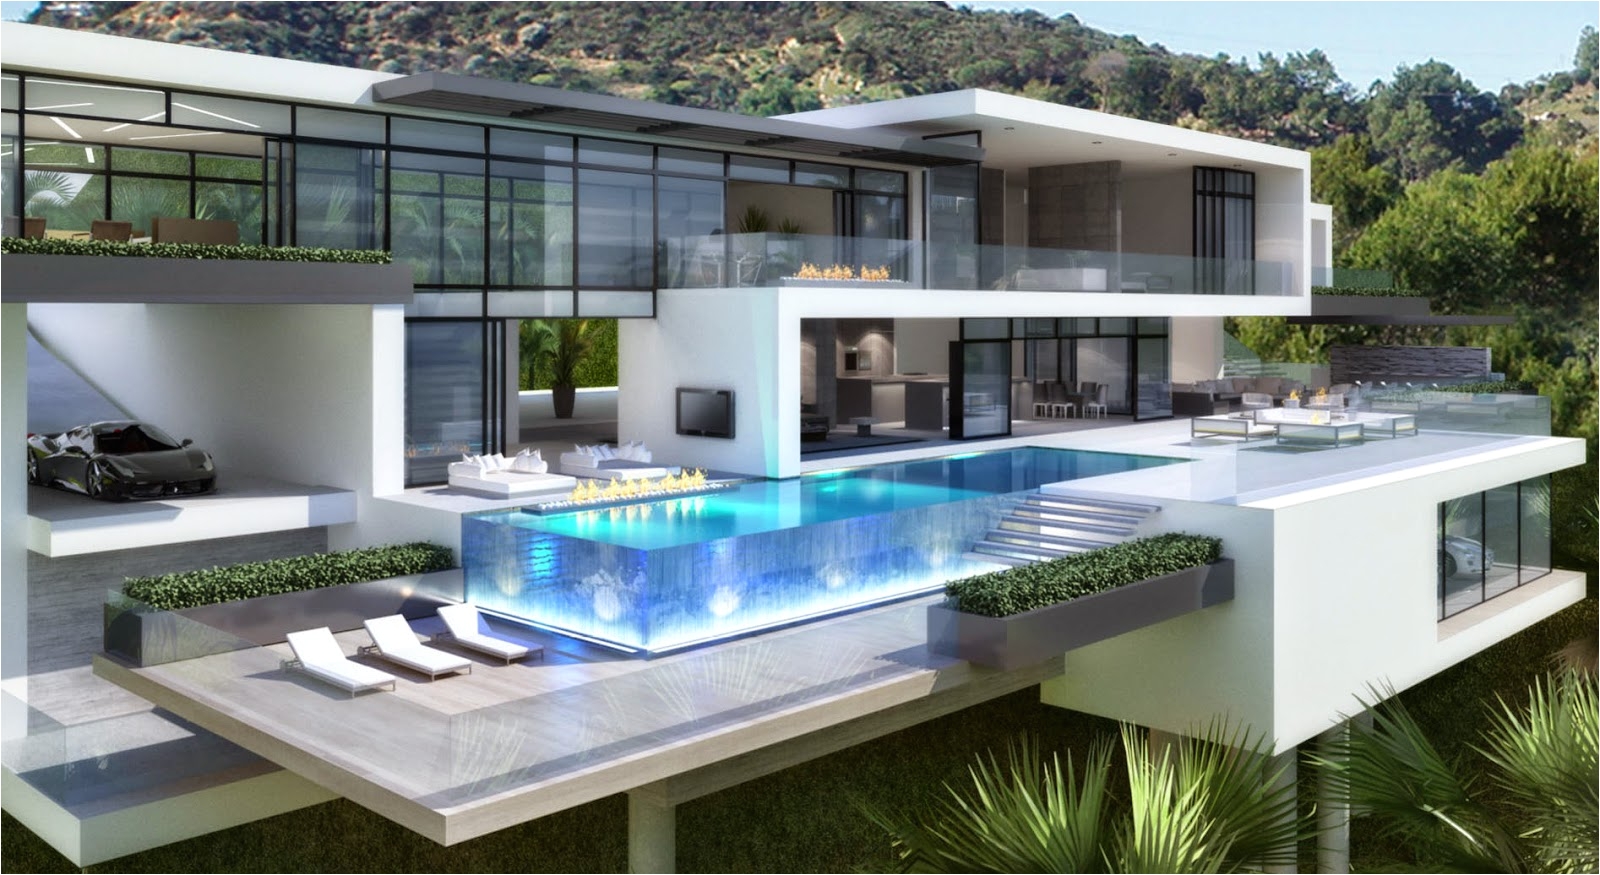 when they will finally become a reality these homes will undoubtedly become some of the most popular and sought after residences in los angeles